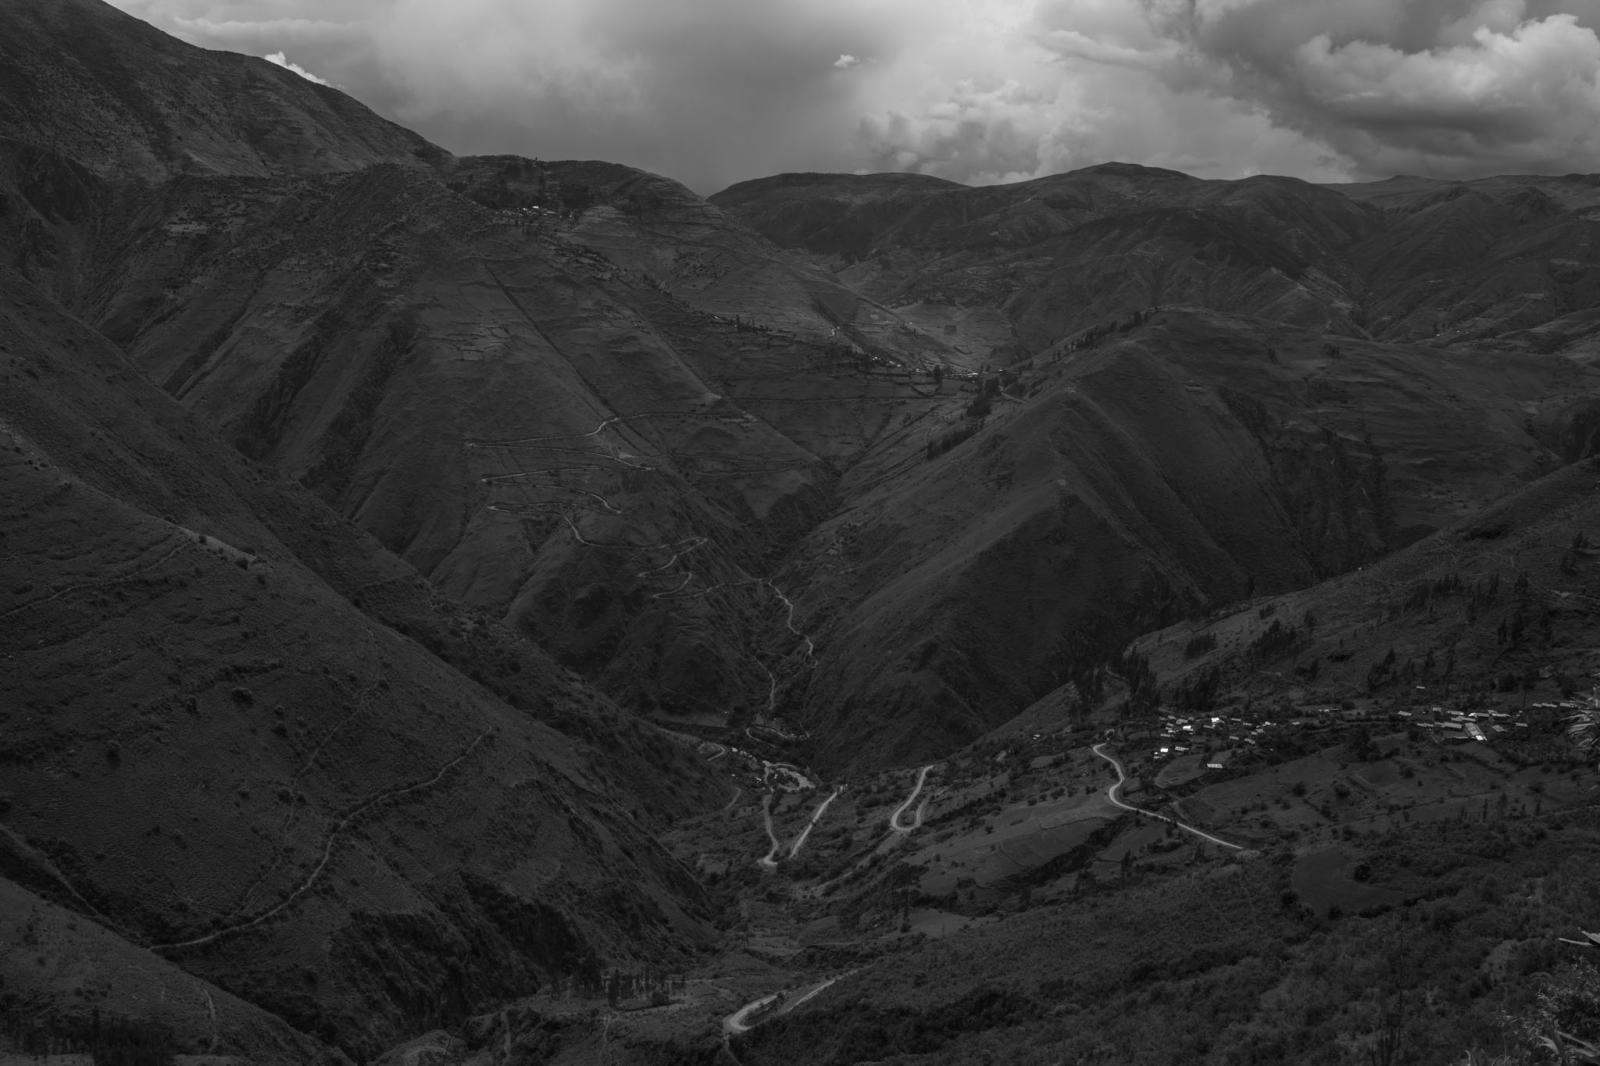 Invisible Work: Unpaid domestic work in the Peruvian Andes.